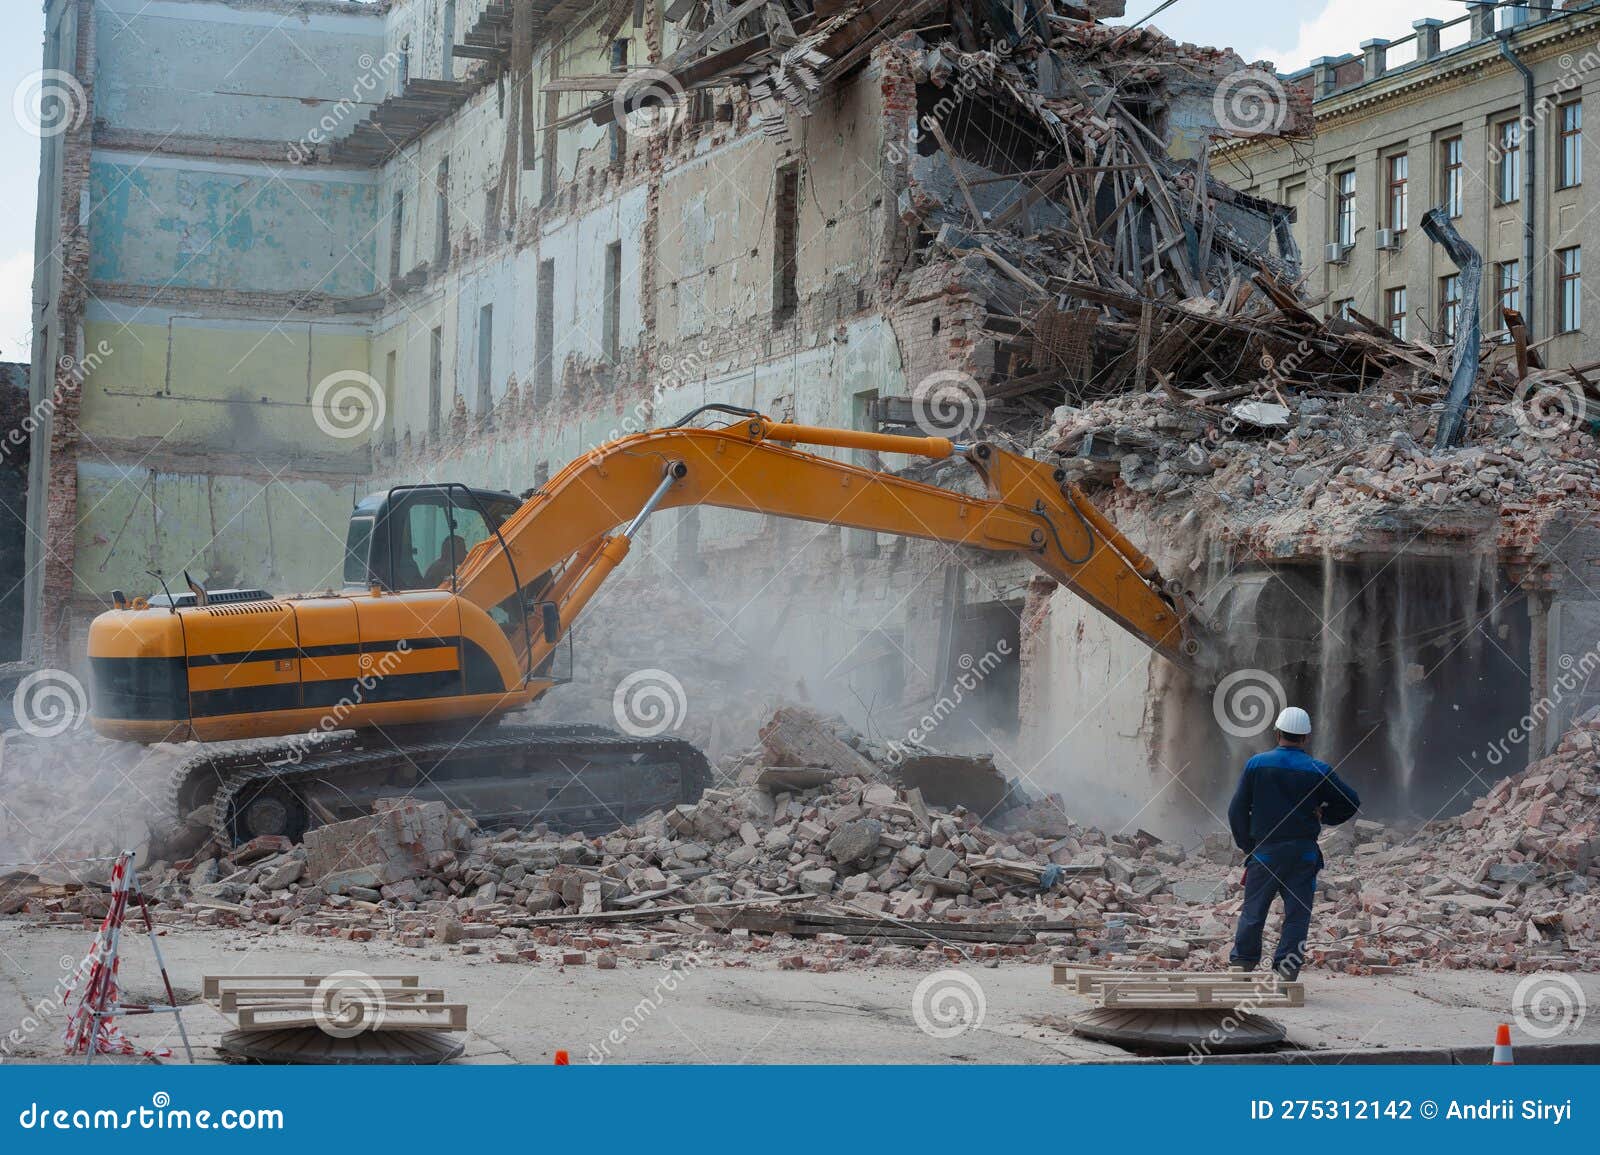 demolition of building. excavator breaks old house. freeing up space for construction of new building